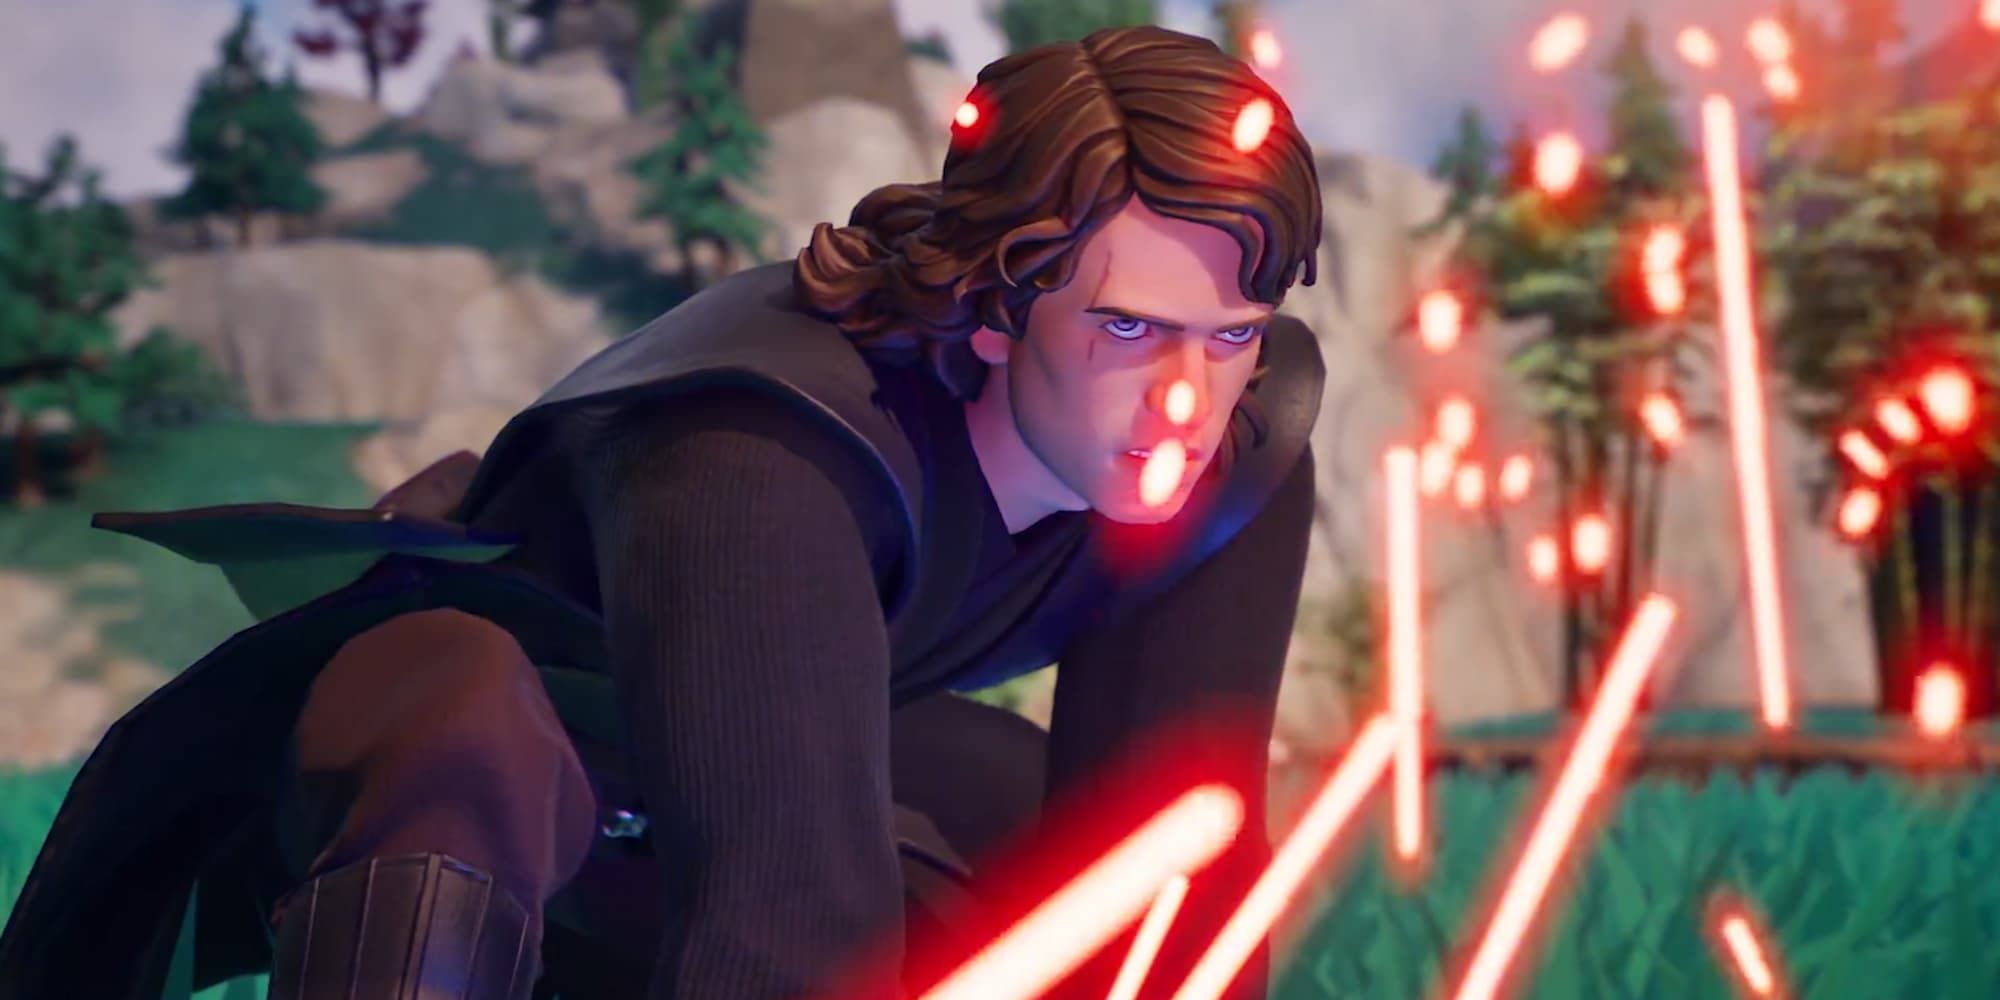 Anakin Skywalker scowls from his hands an knees as red sparks surround him in Fortnite.